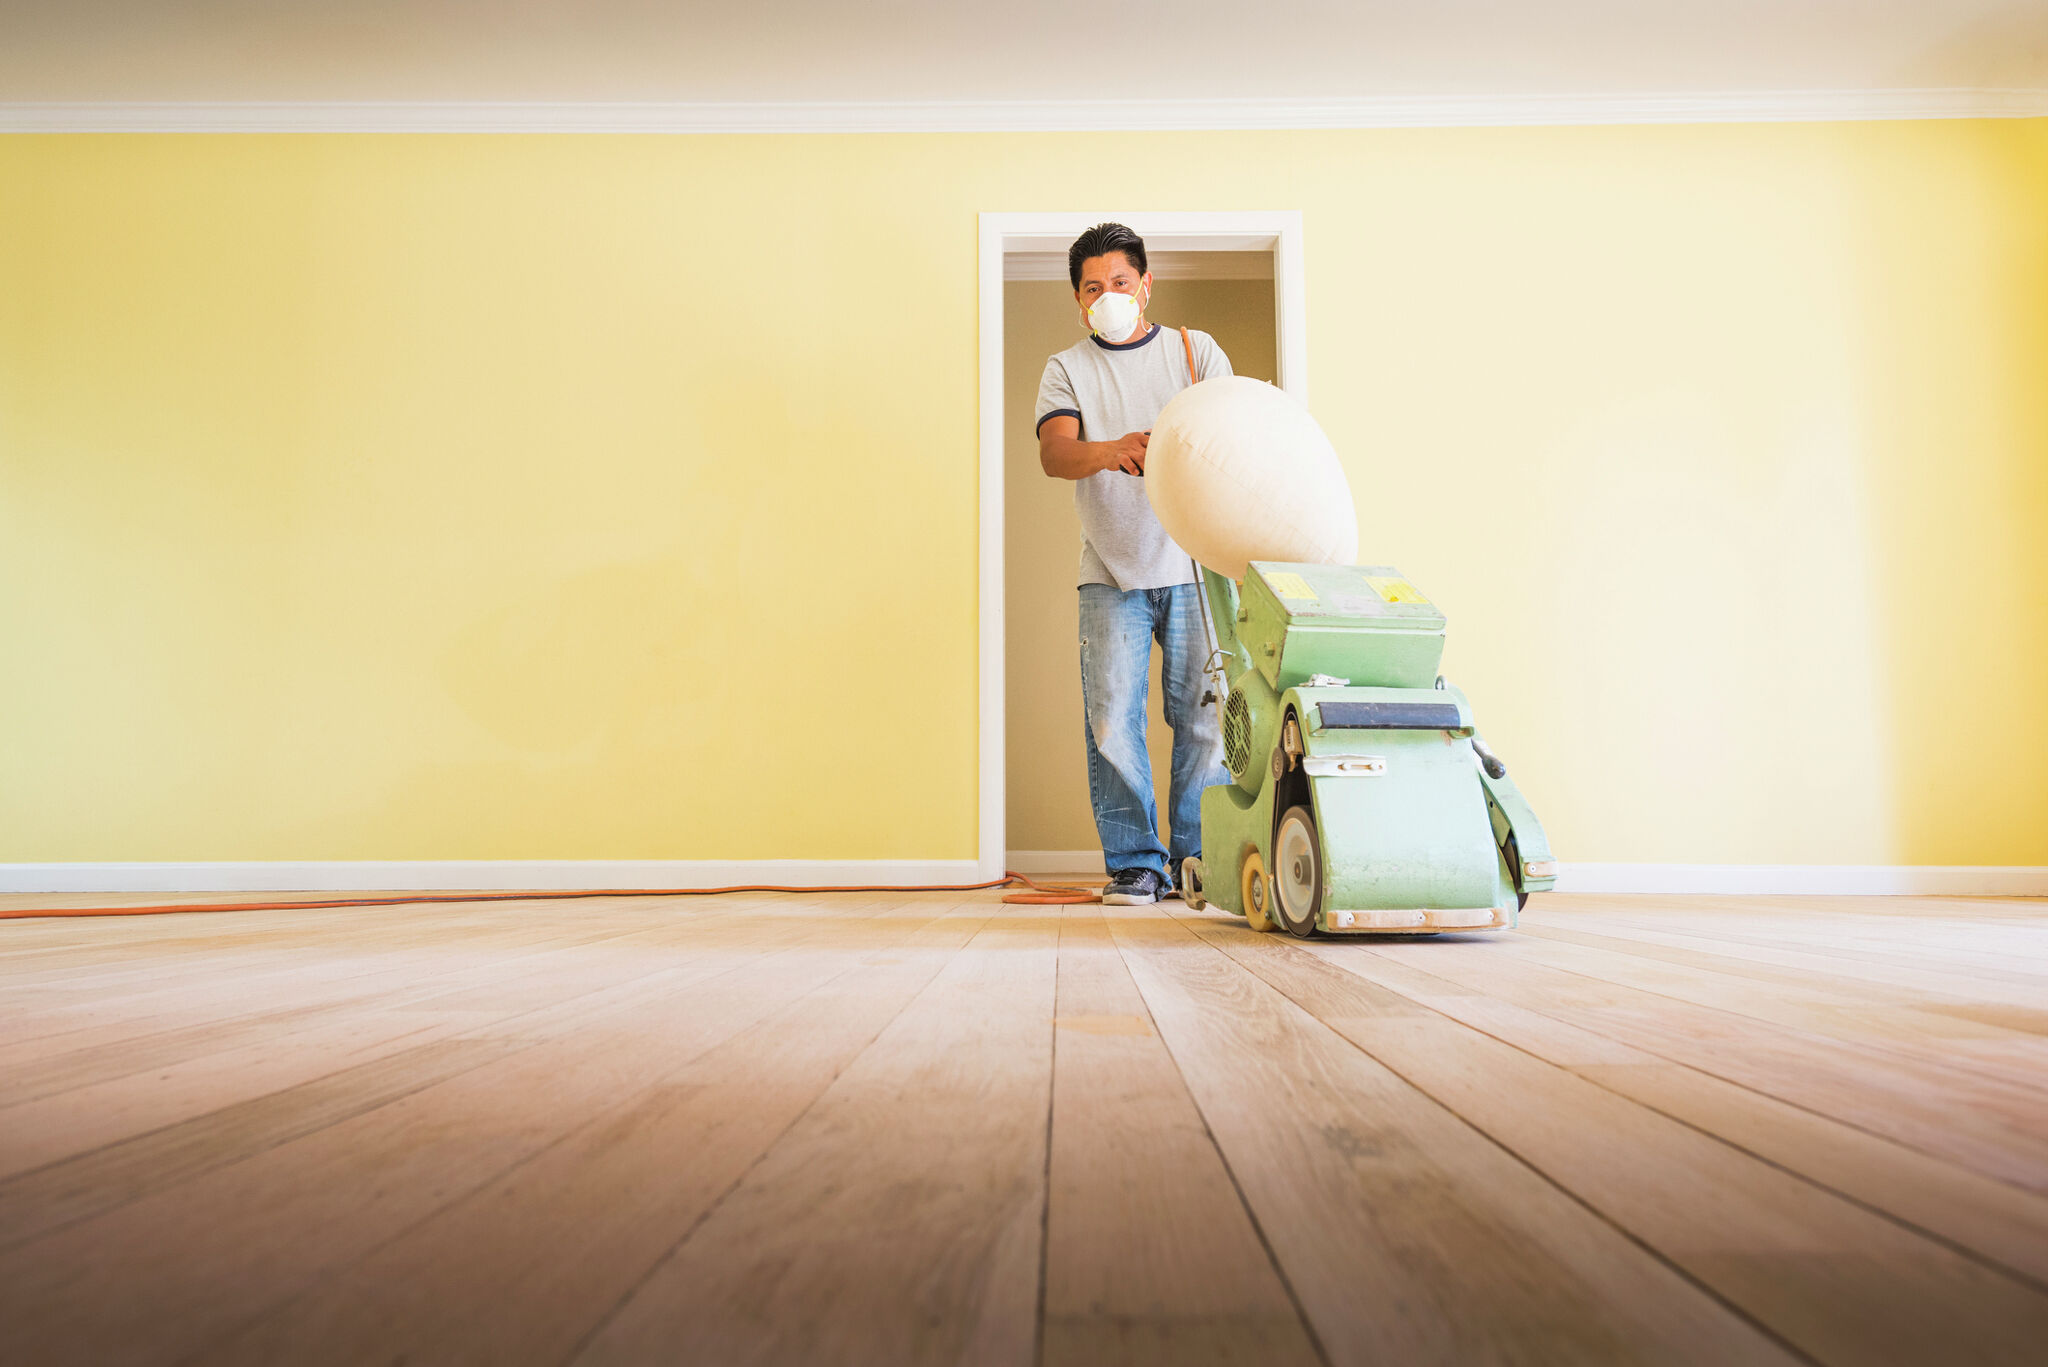 How to refinish hardwood floors yourself, or use a professional